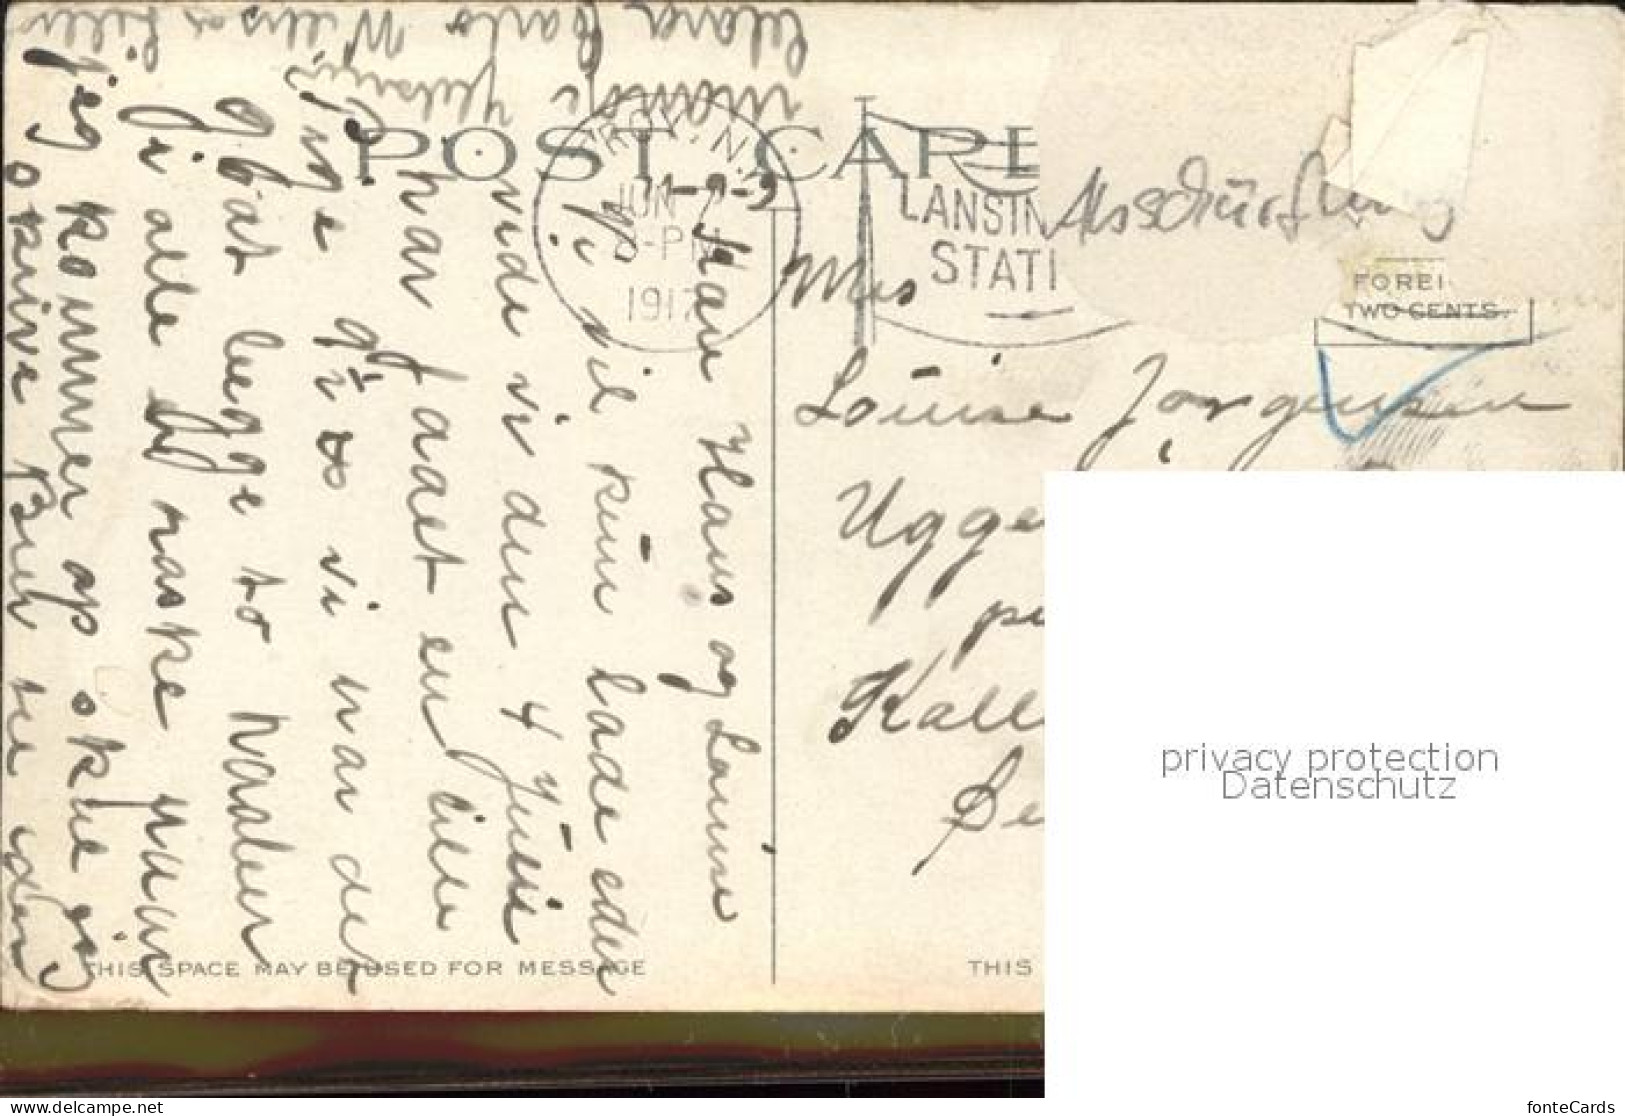 11569051 Troy_New_York Cluett Peabody & Company`s Lollar Shops - Other & Unclassified